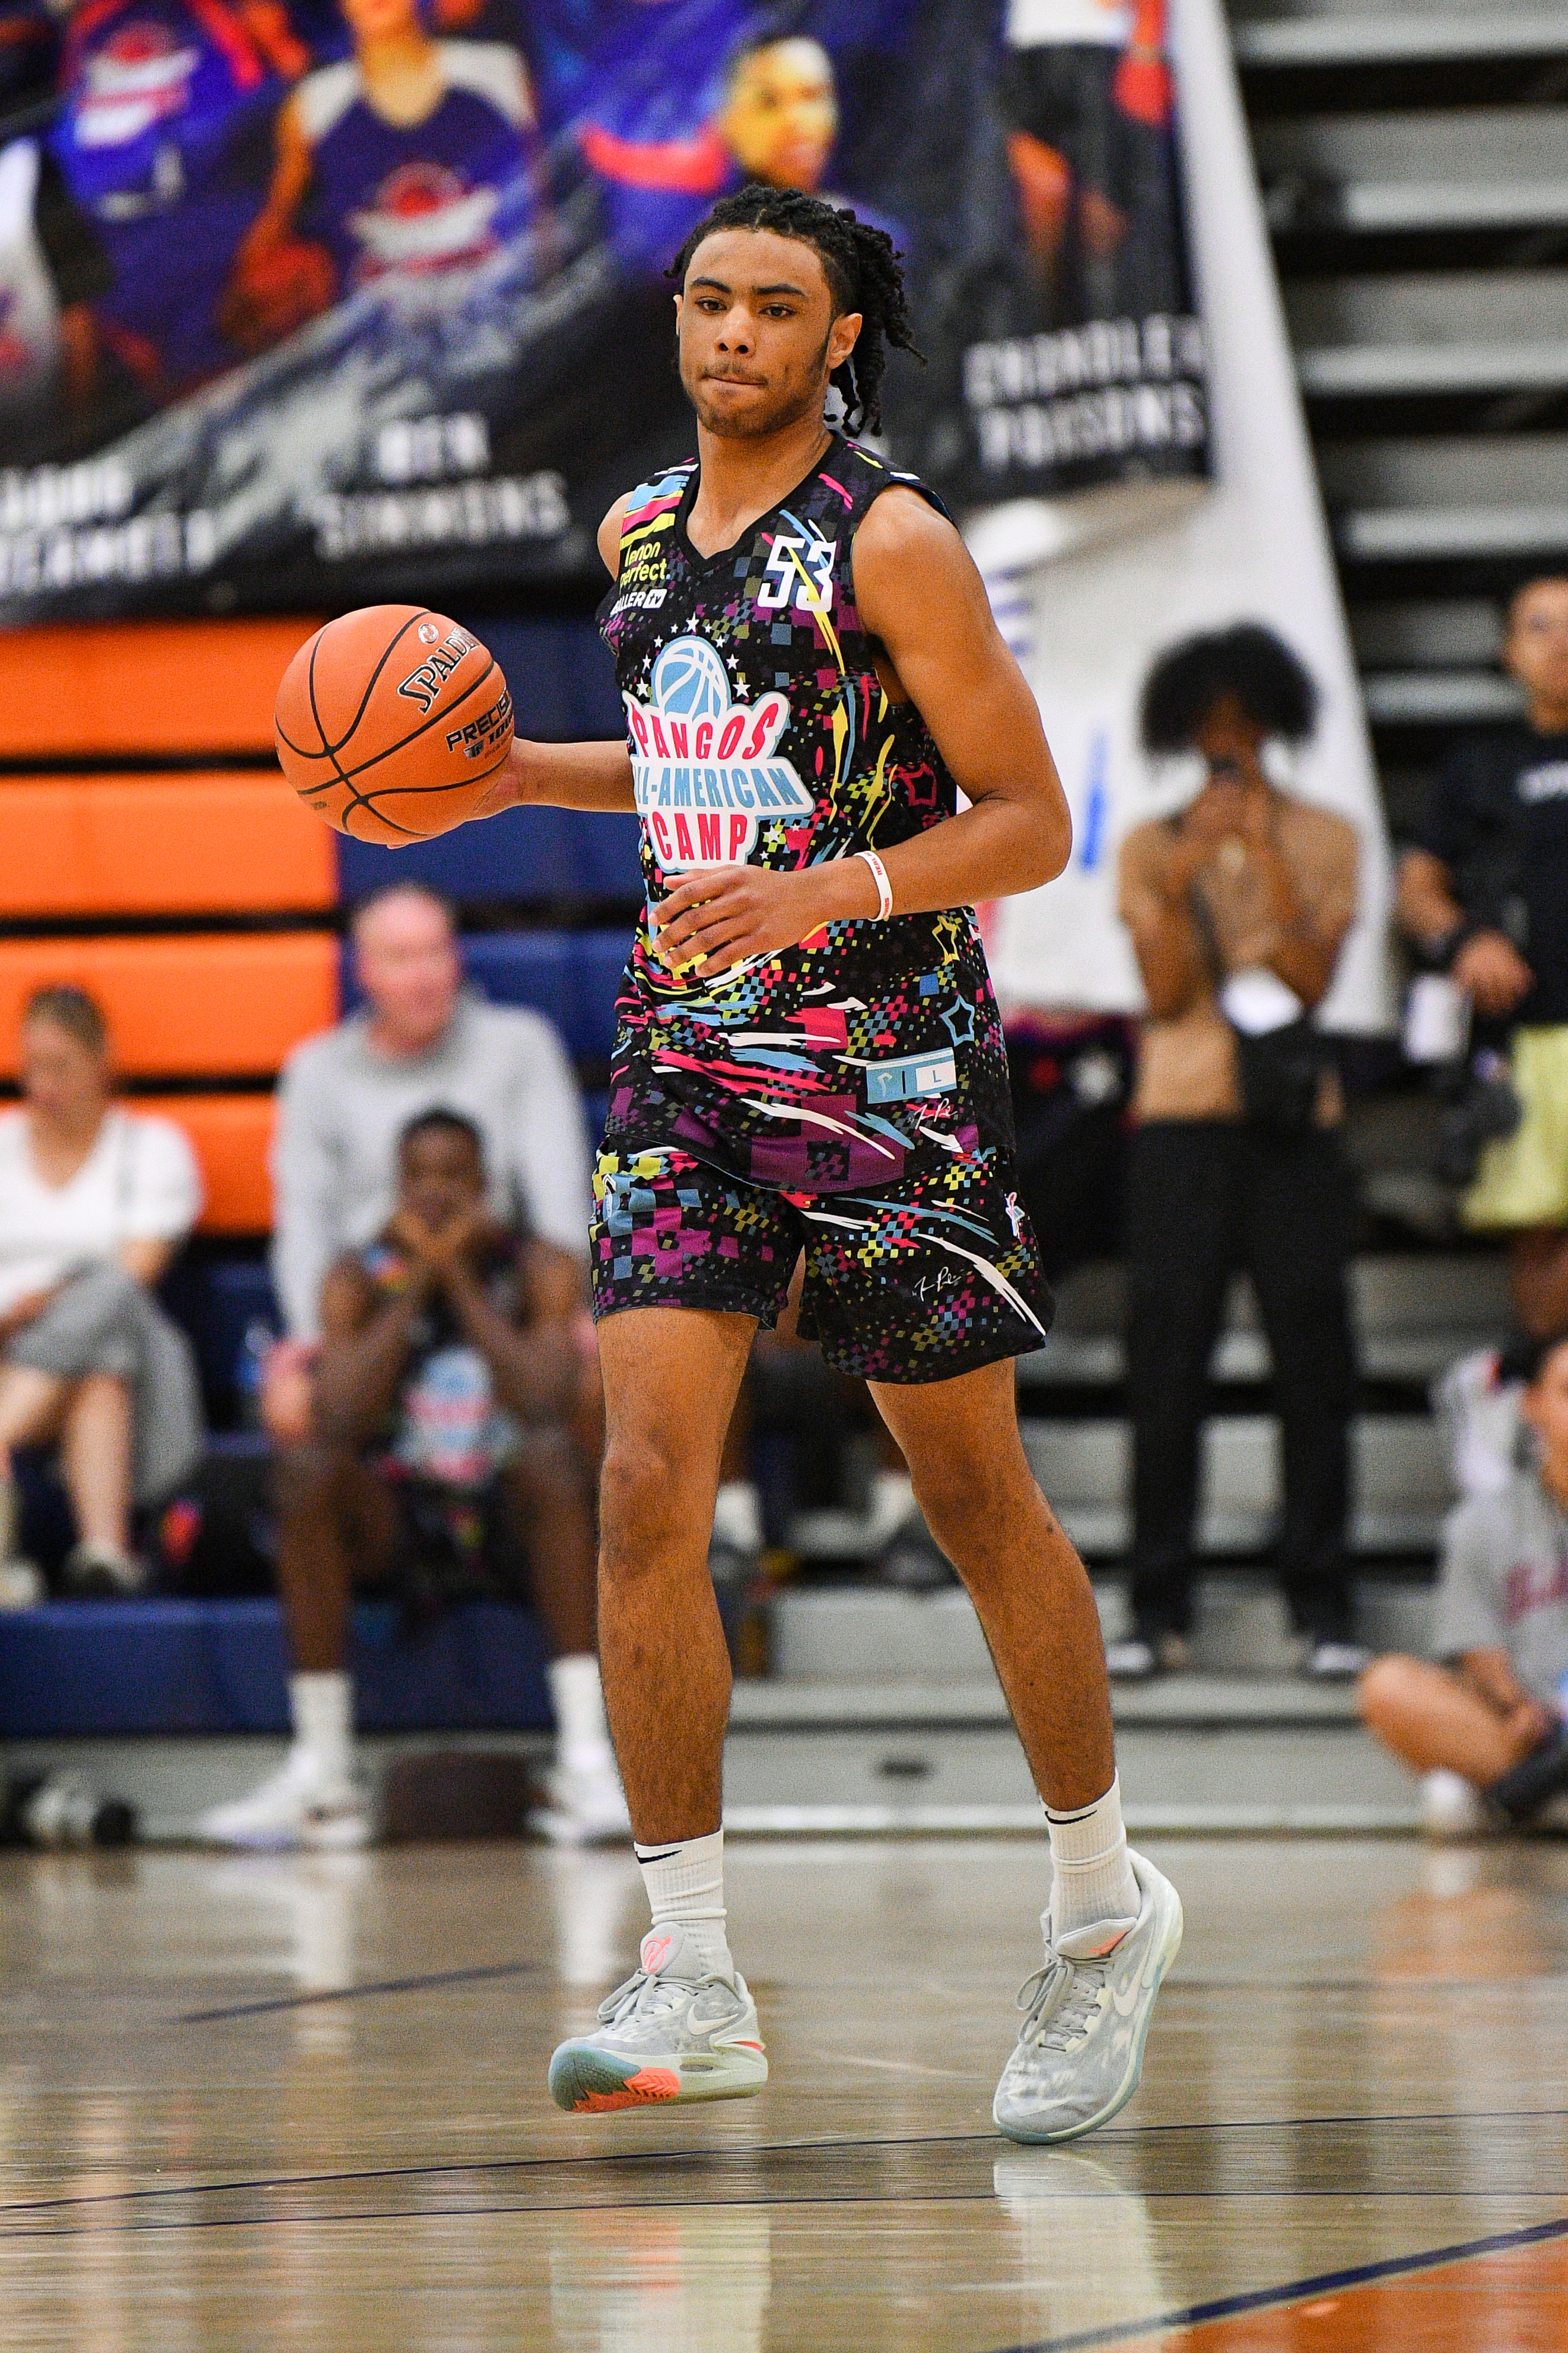 Jaiden Glover dribbles up the court during the Pangos All-American Camp on June 5, 2023 at the Bishop Gorman High School in Las Vegas, NV.